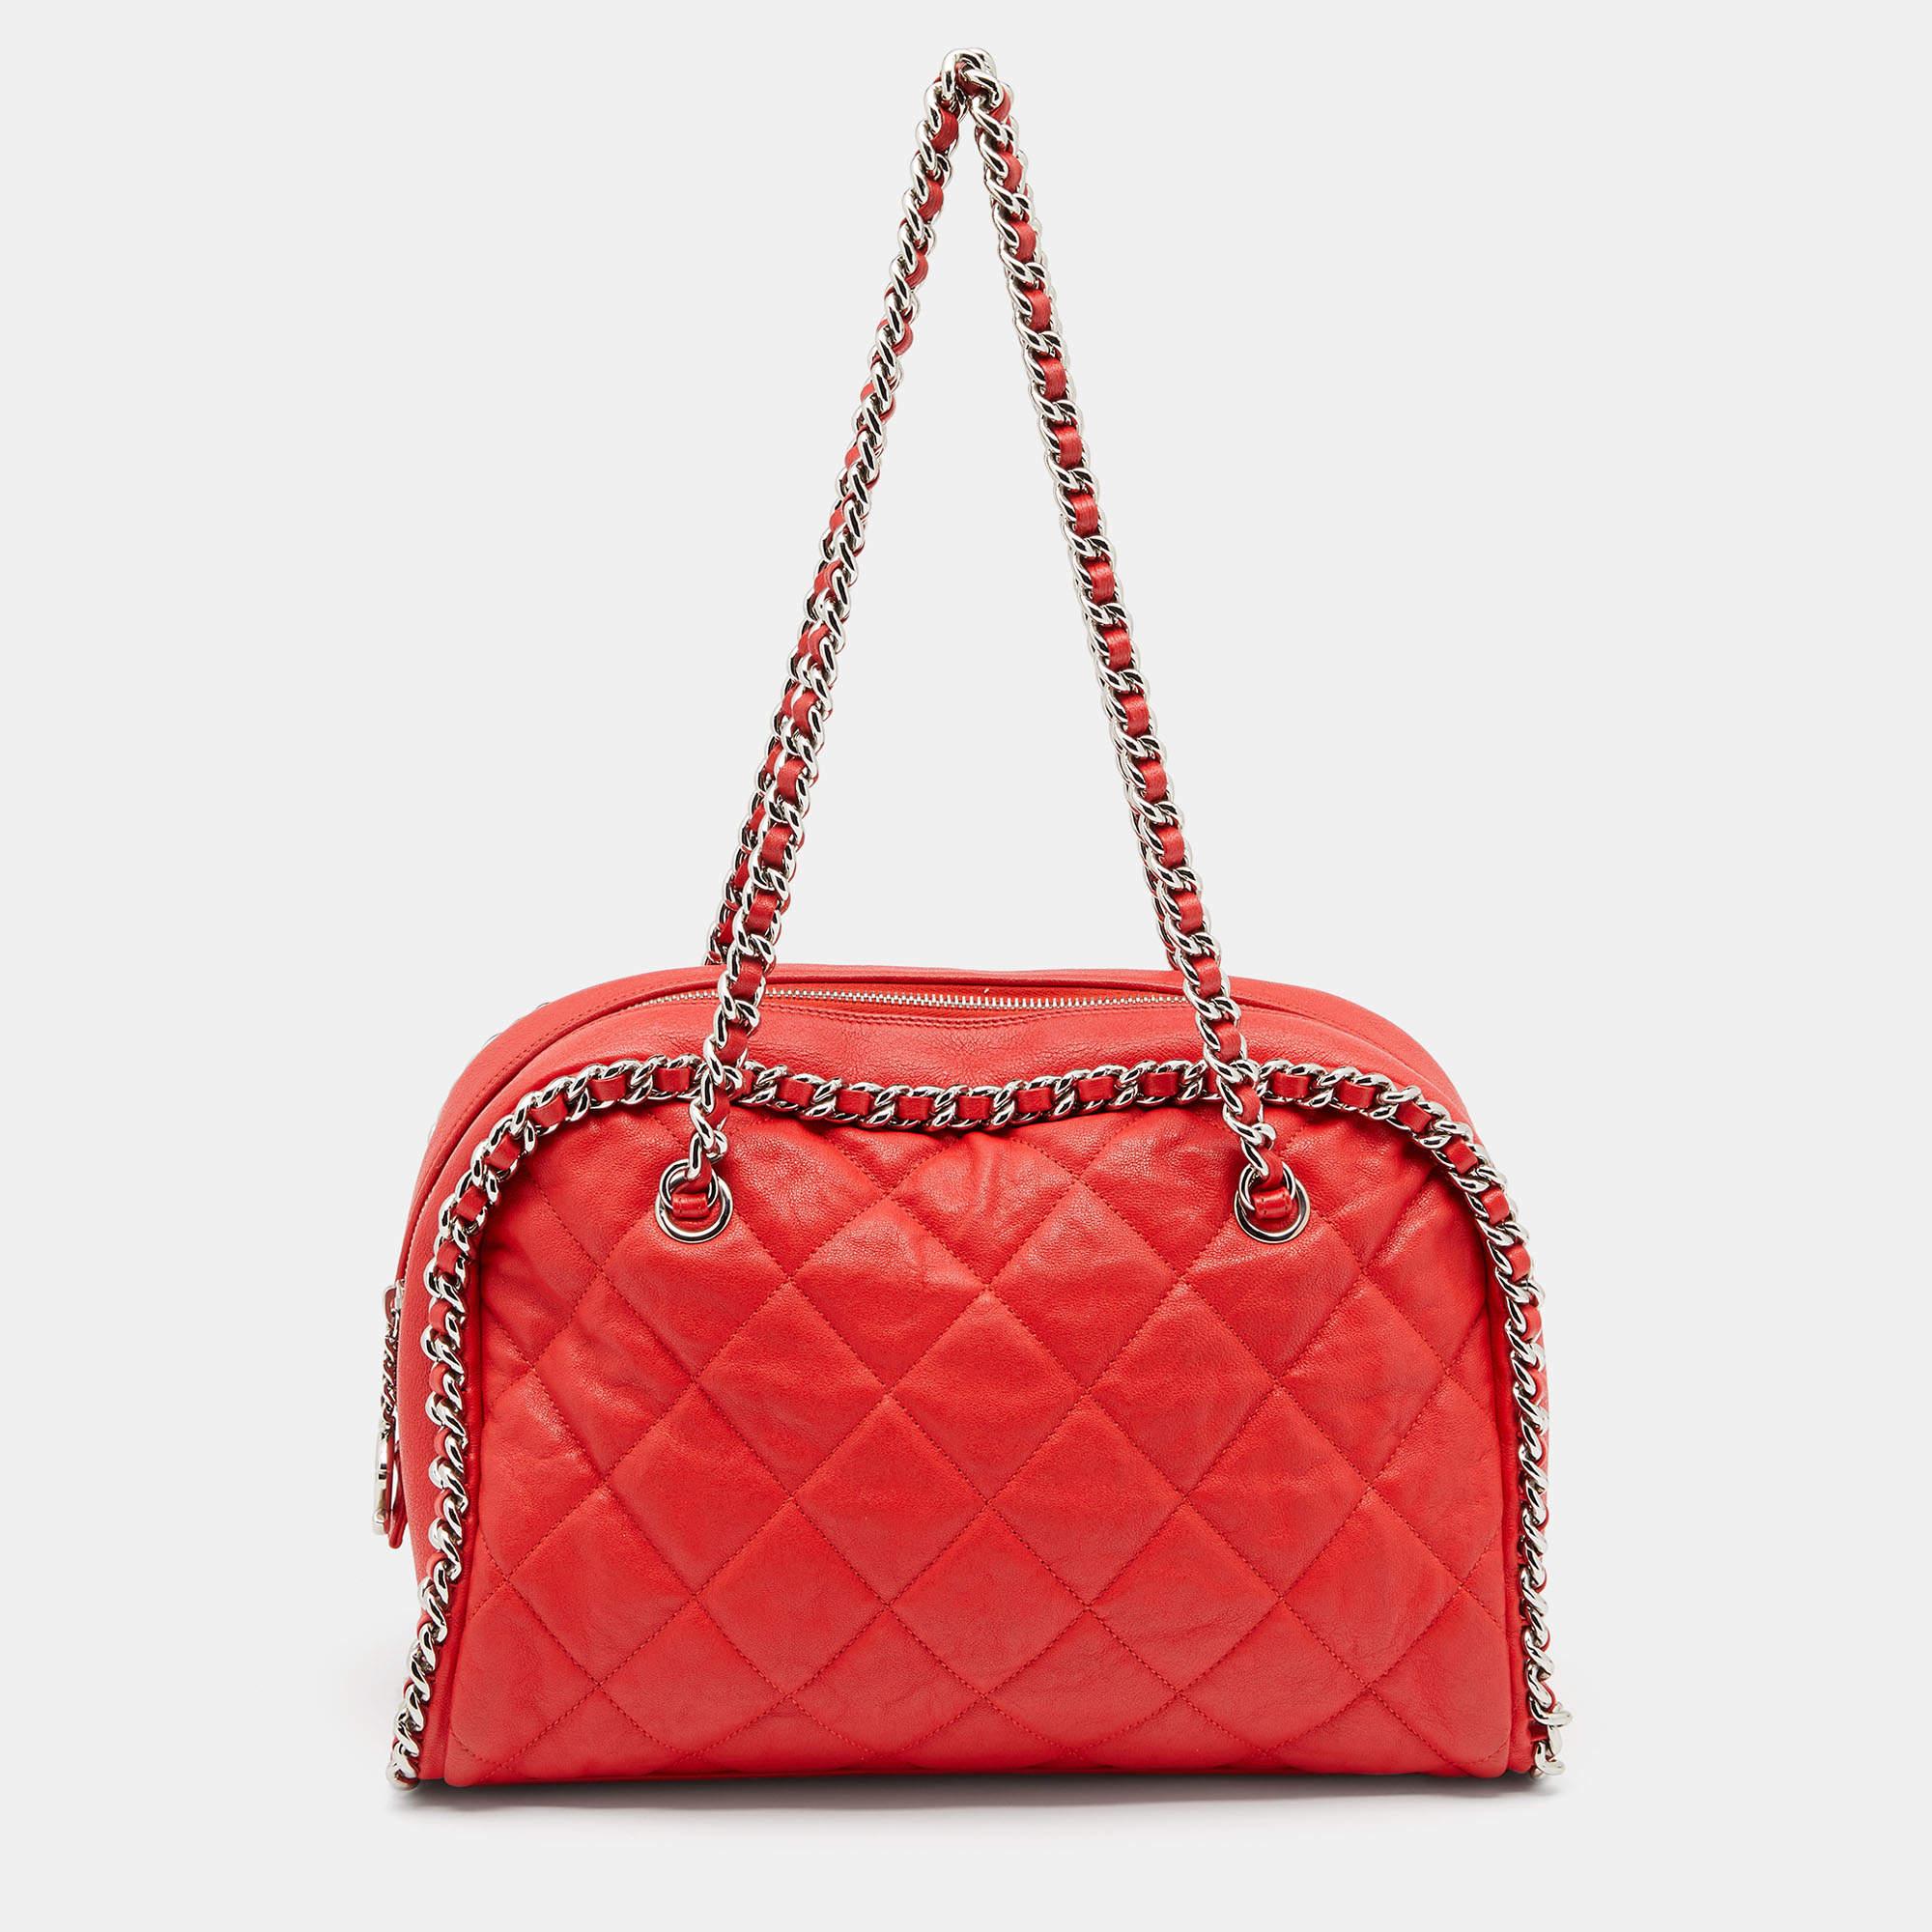 This shoulder bag from Chanel is perfect for your fashion arsenal, bringing along the iconic quilt pattern, the CC logo as the zipper pull, and woven chains outlining the bag and also forming the handles. It is finely crafted from leather and